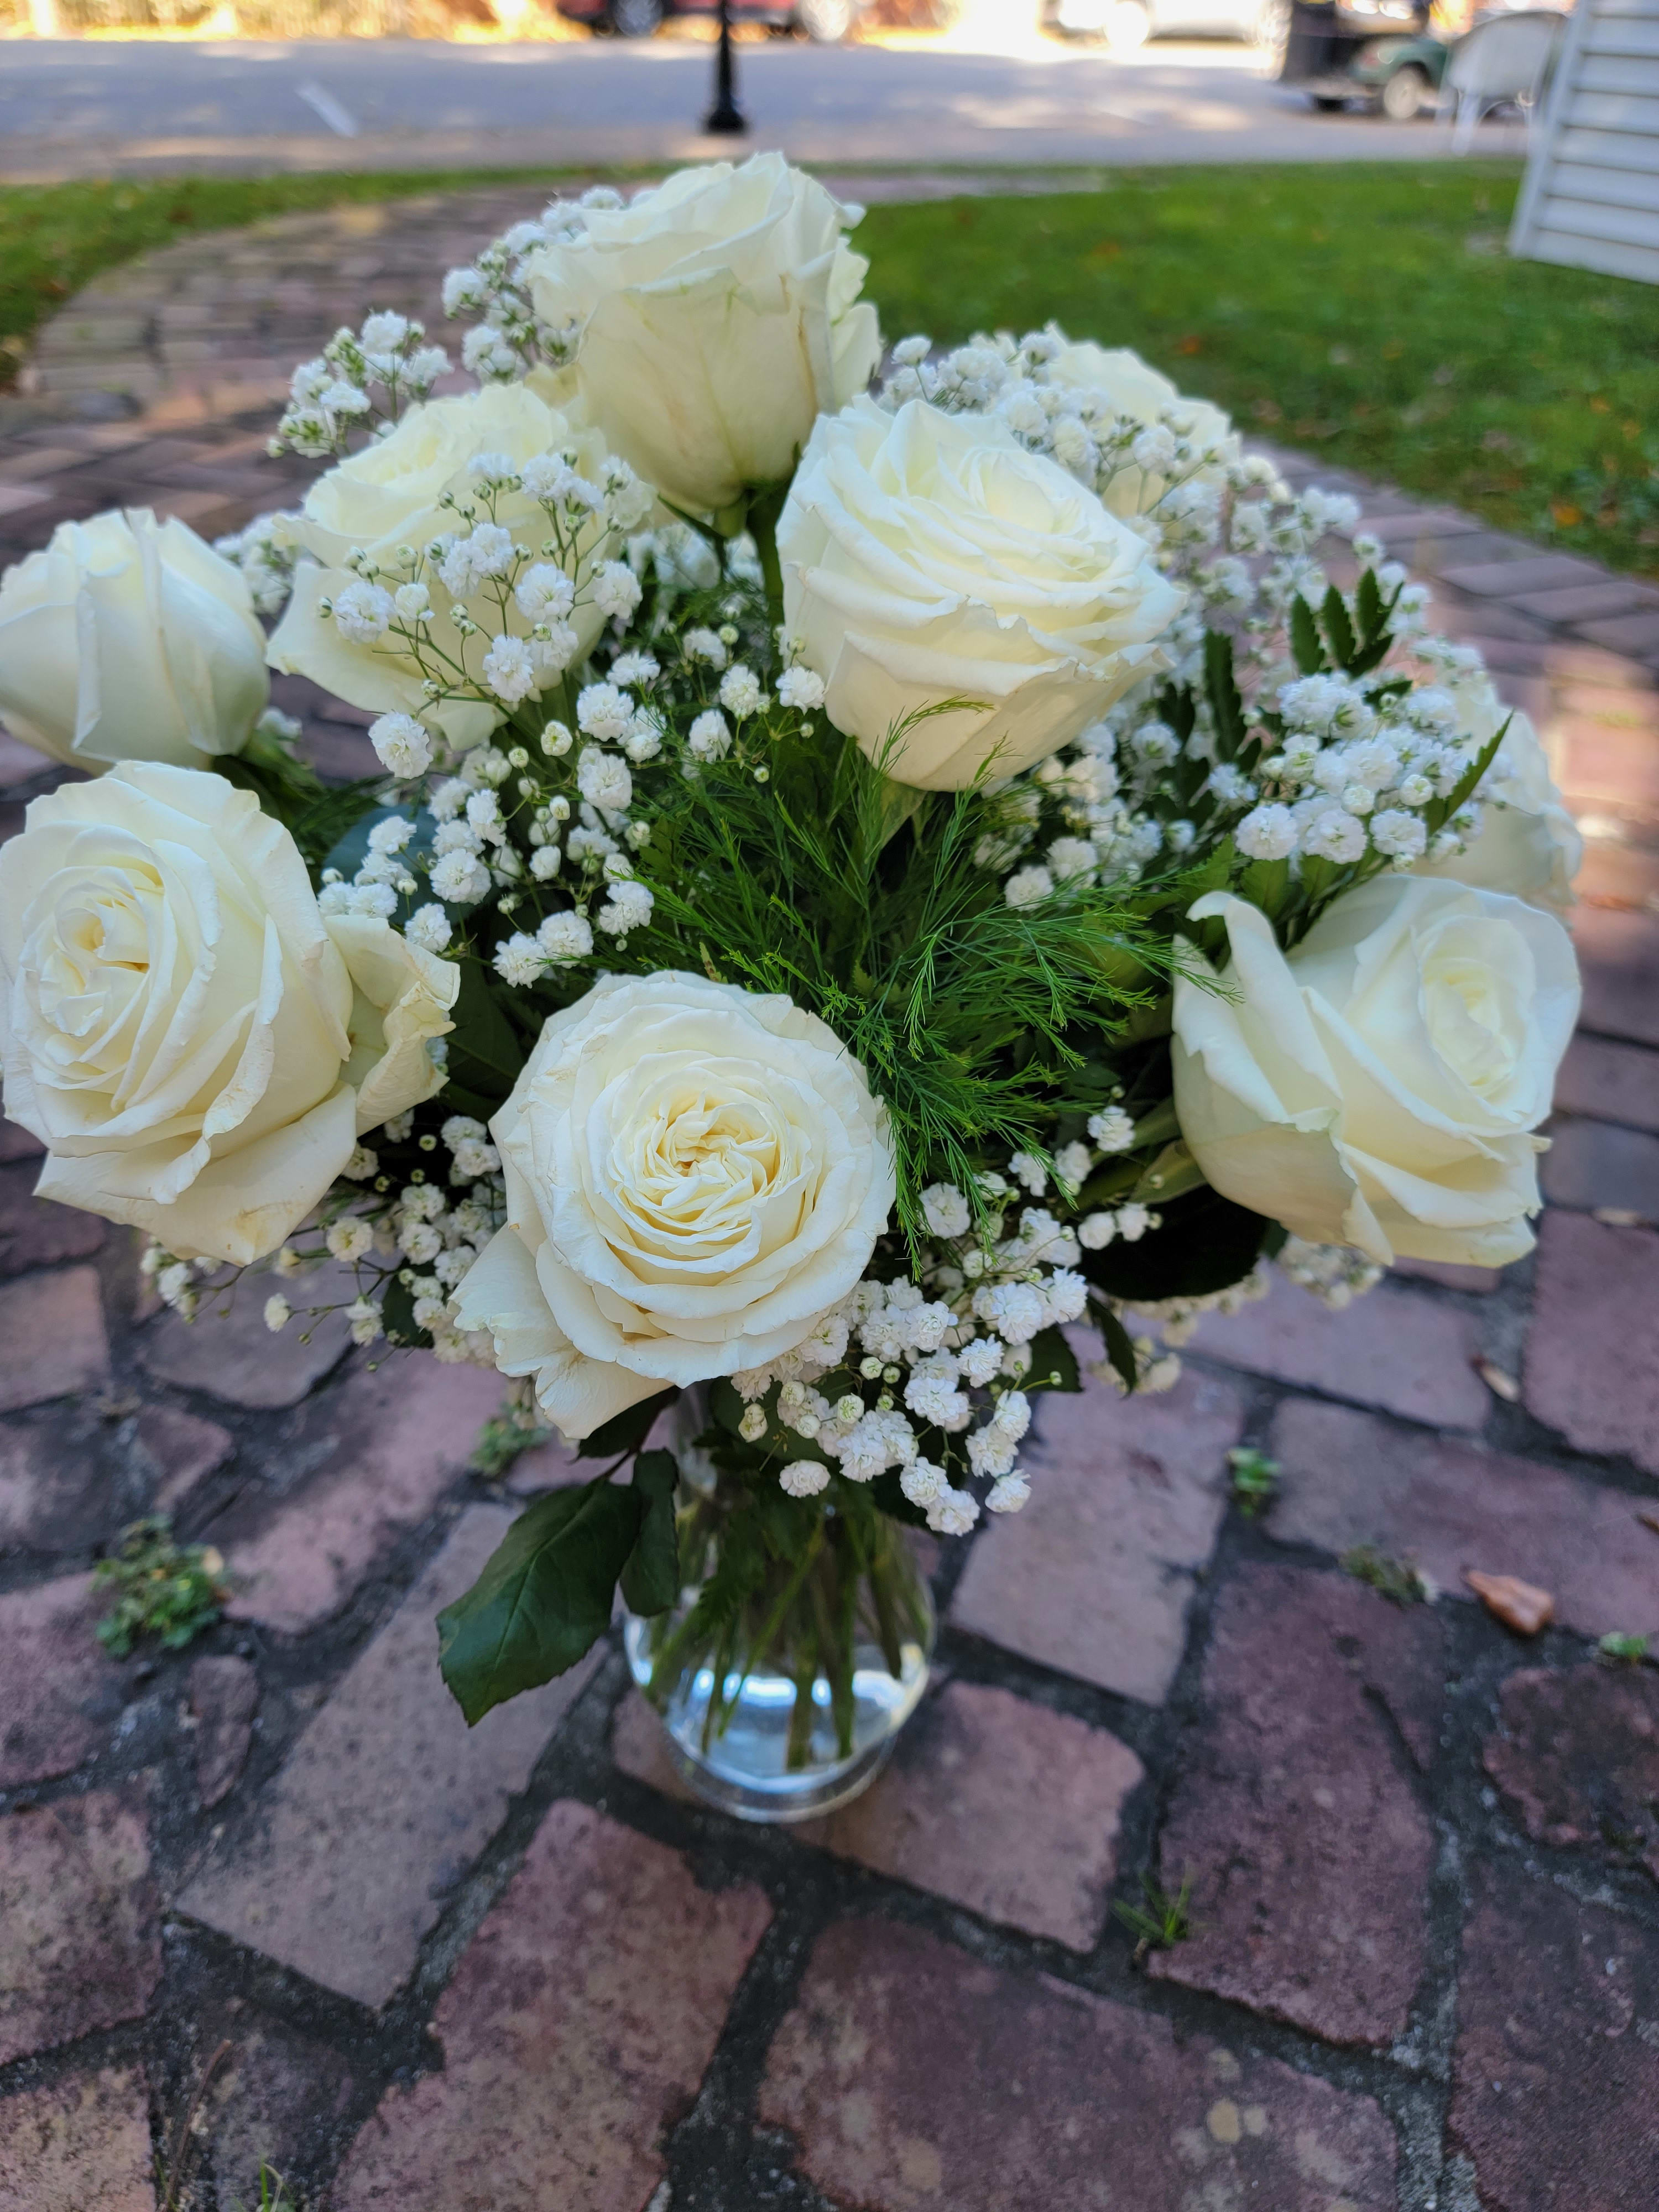 Dozen Long Stem White Roses by BloomNation™ - A dozen white roses are a classic gift! Perfect for Valentine's Day, an Anniversary, or any type of celebration.  Approximate Dimensions: 20&quot;D x 30&quot;H